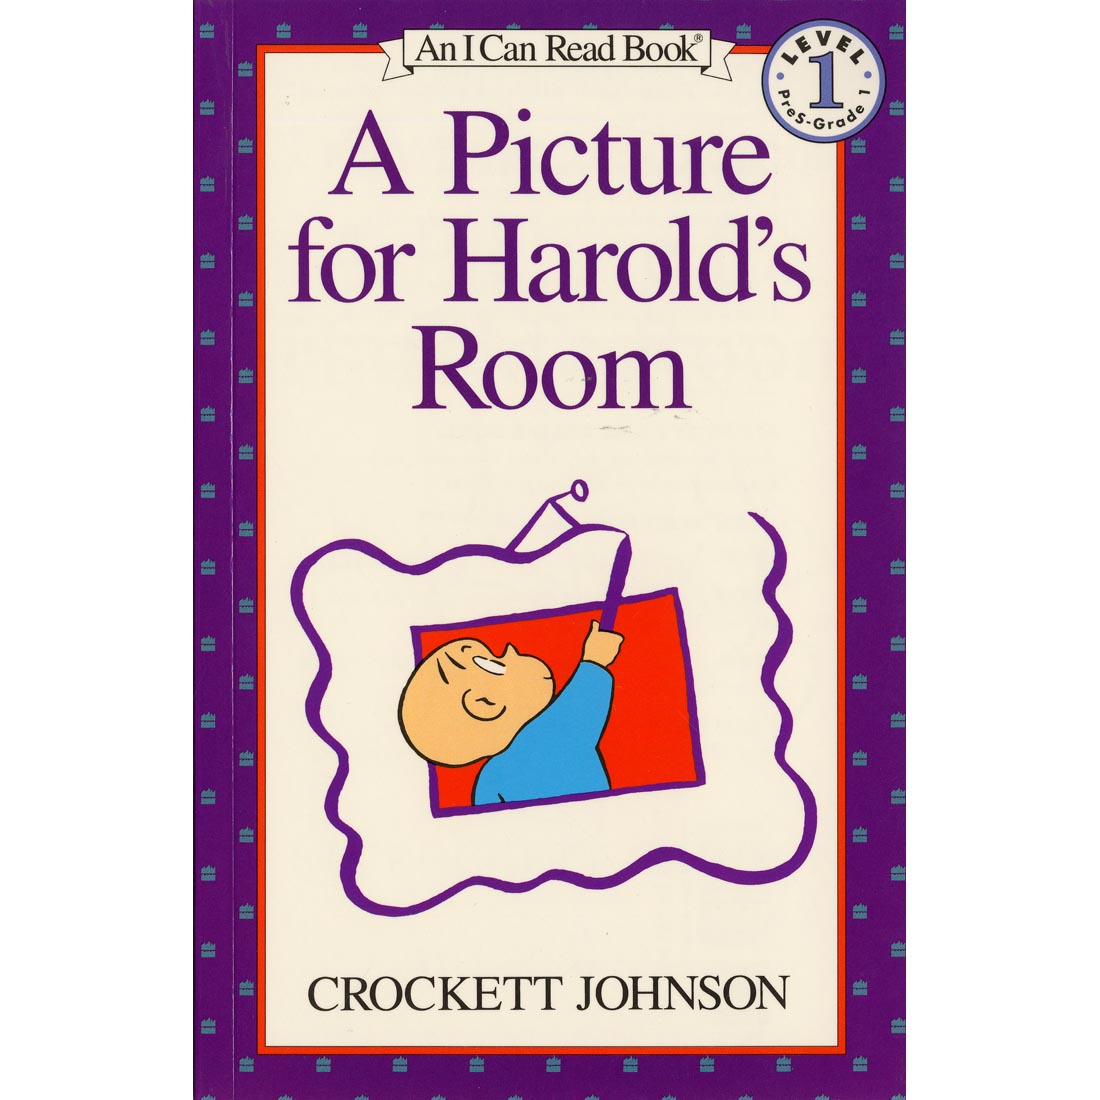 A Picture For Harold's Room - An I Can Read Book, Level 1